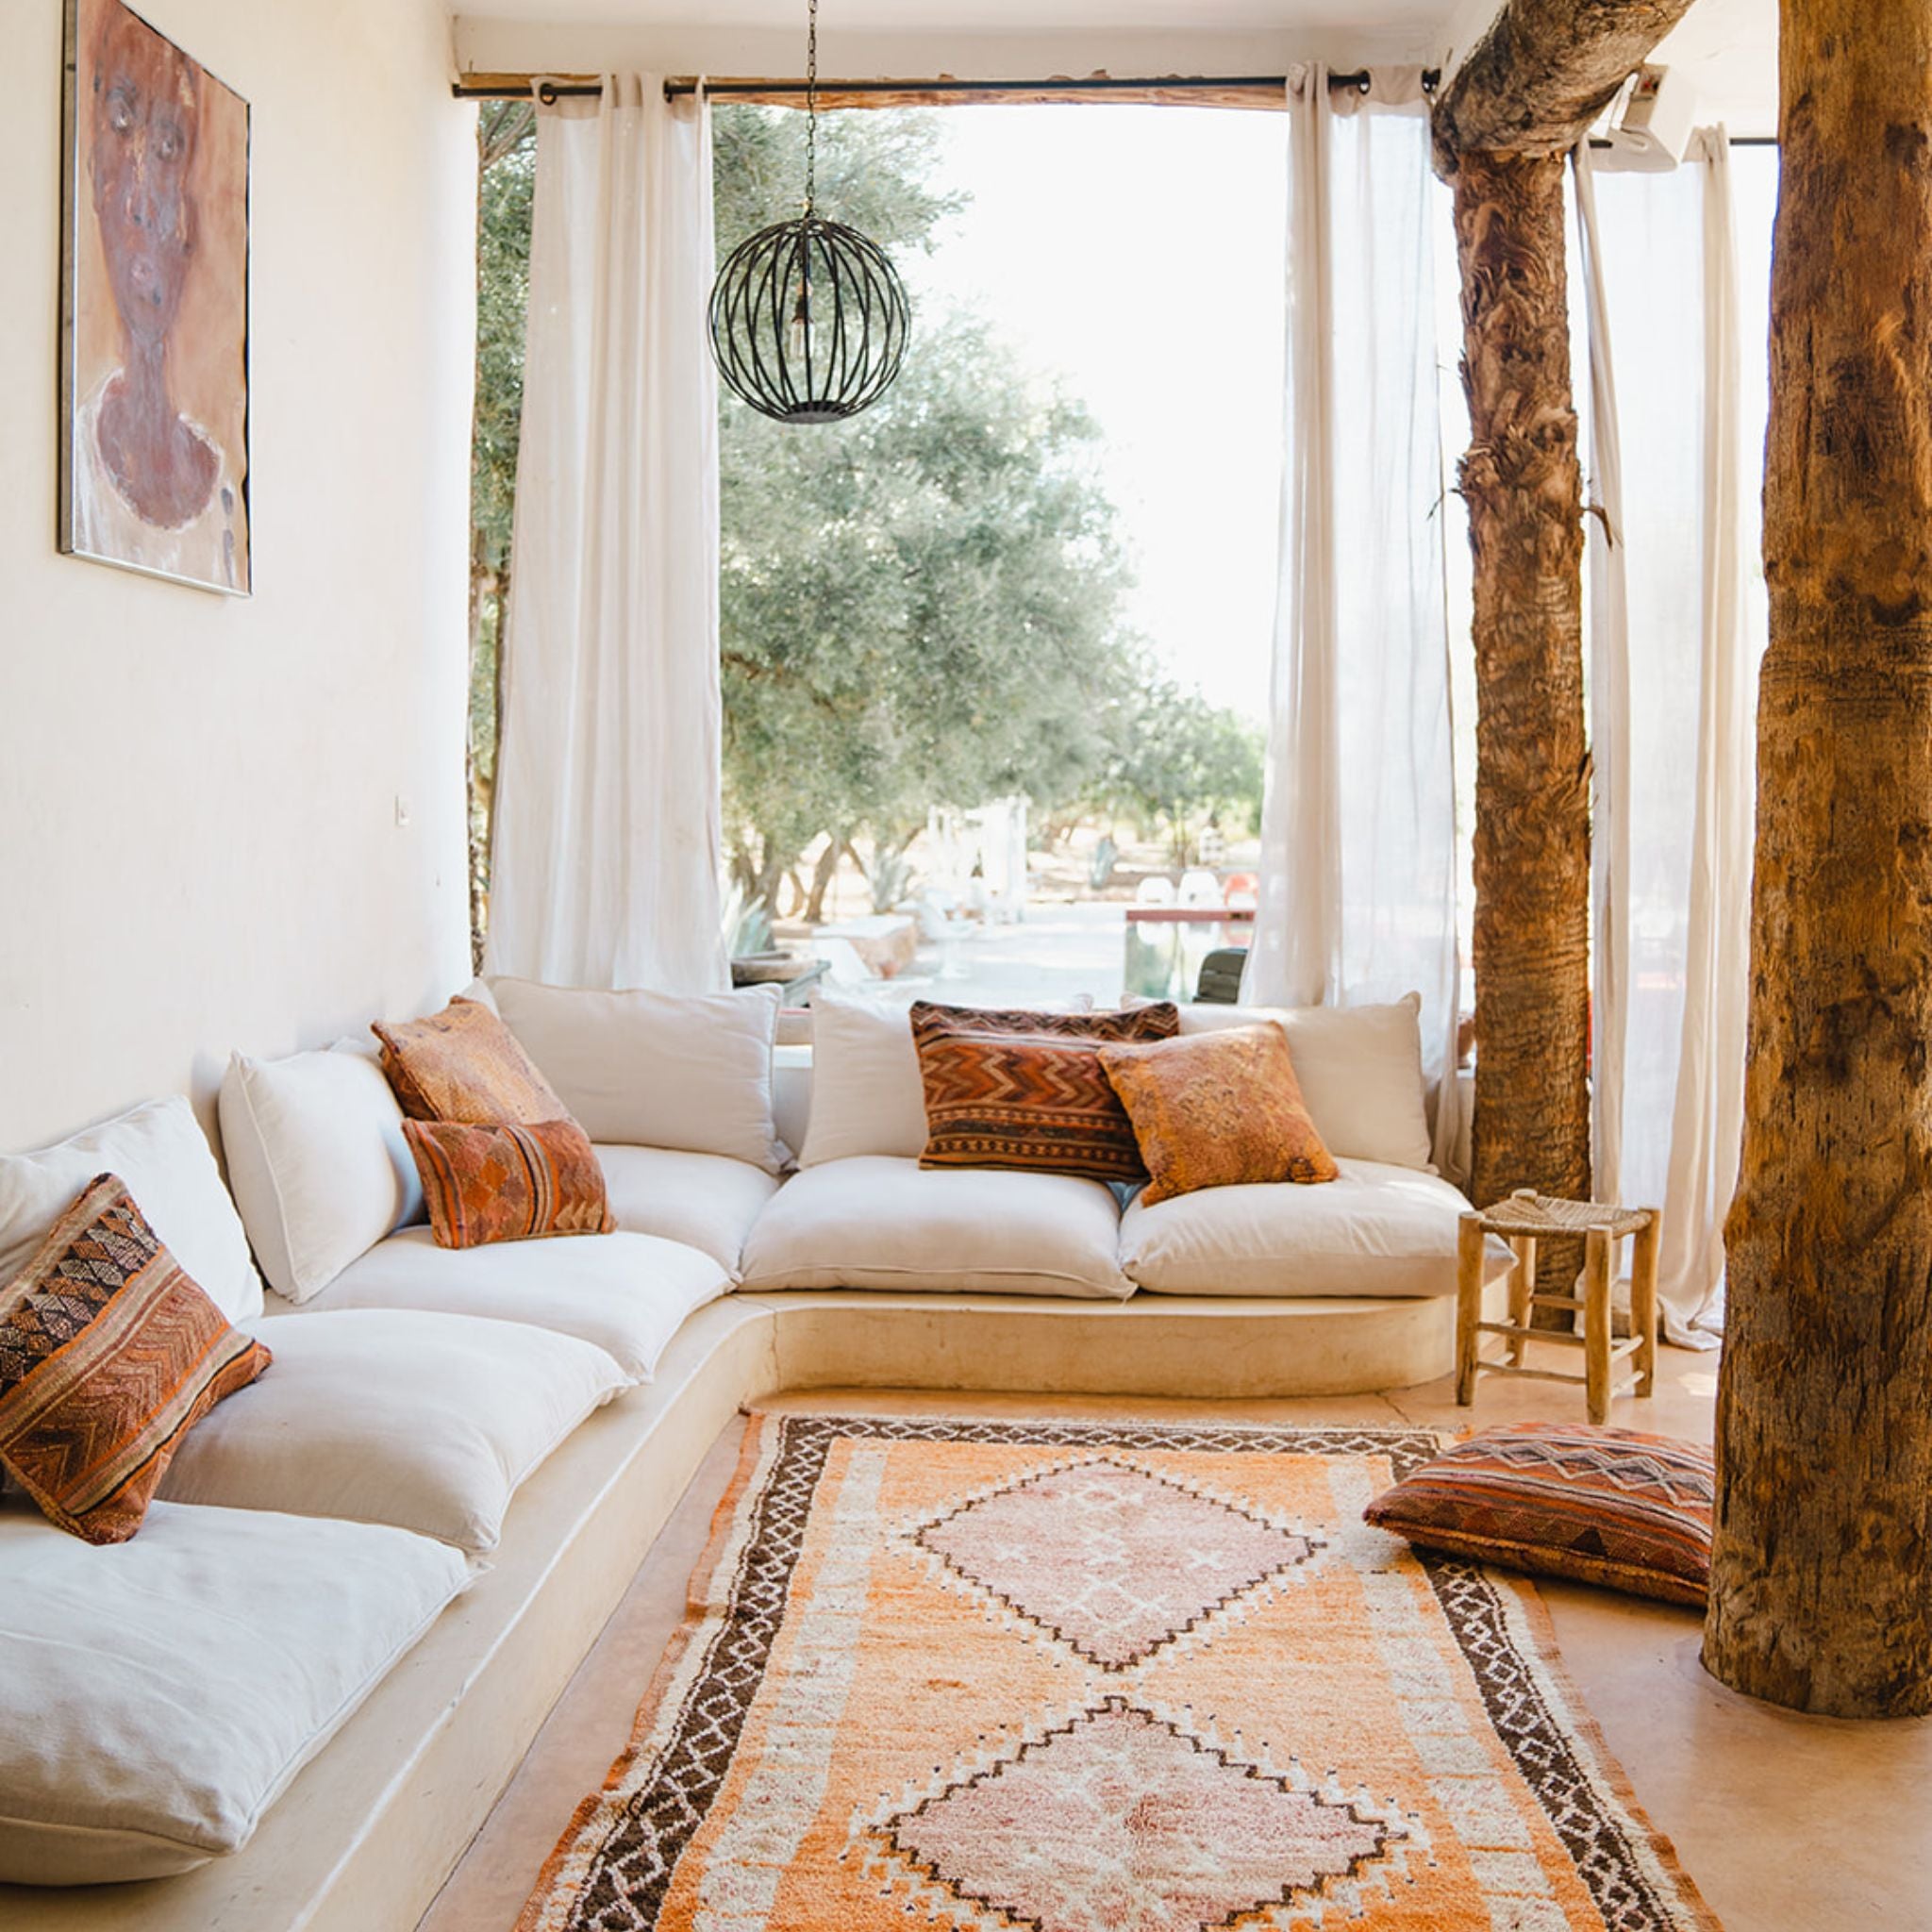 A Terracotta Coloured Vintage Moroccan Rug and Cushions in front of a couch in Marrakech Morocco